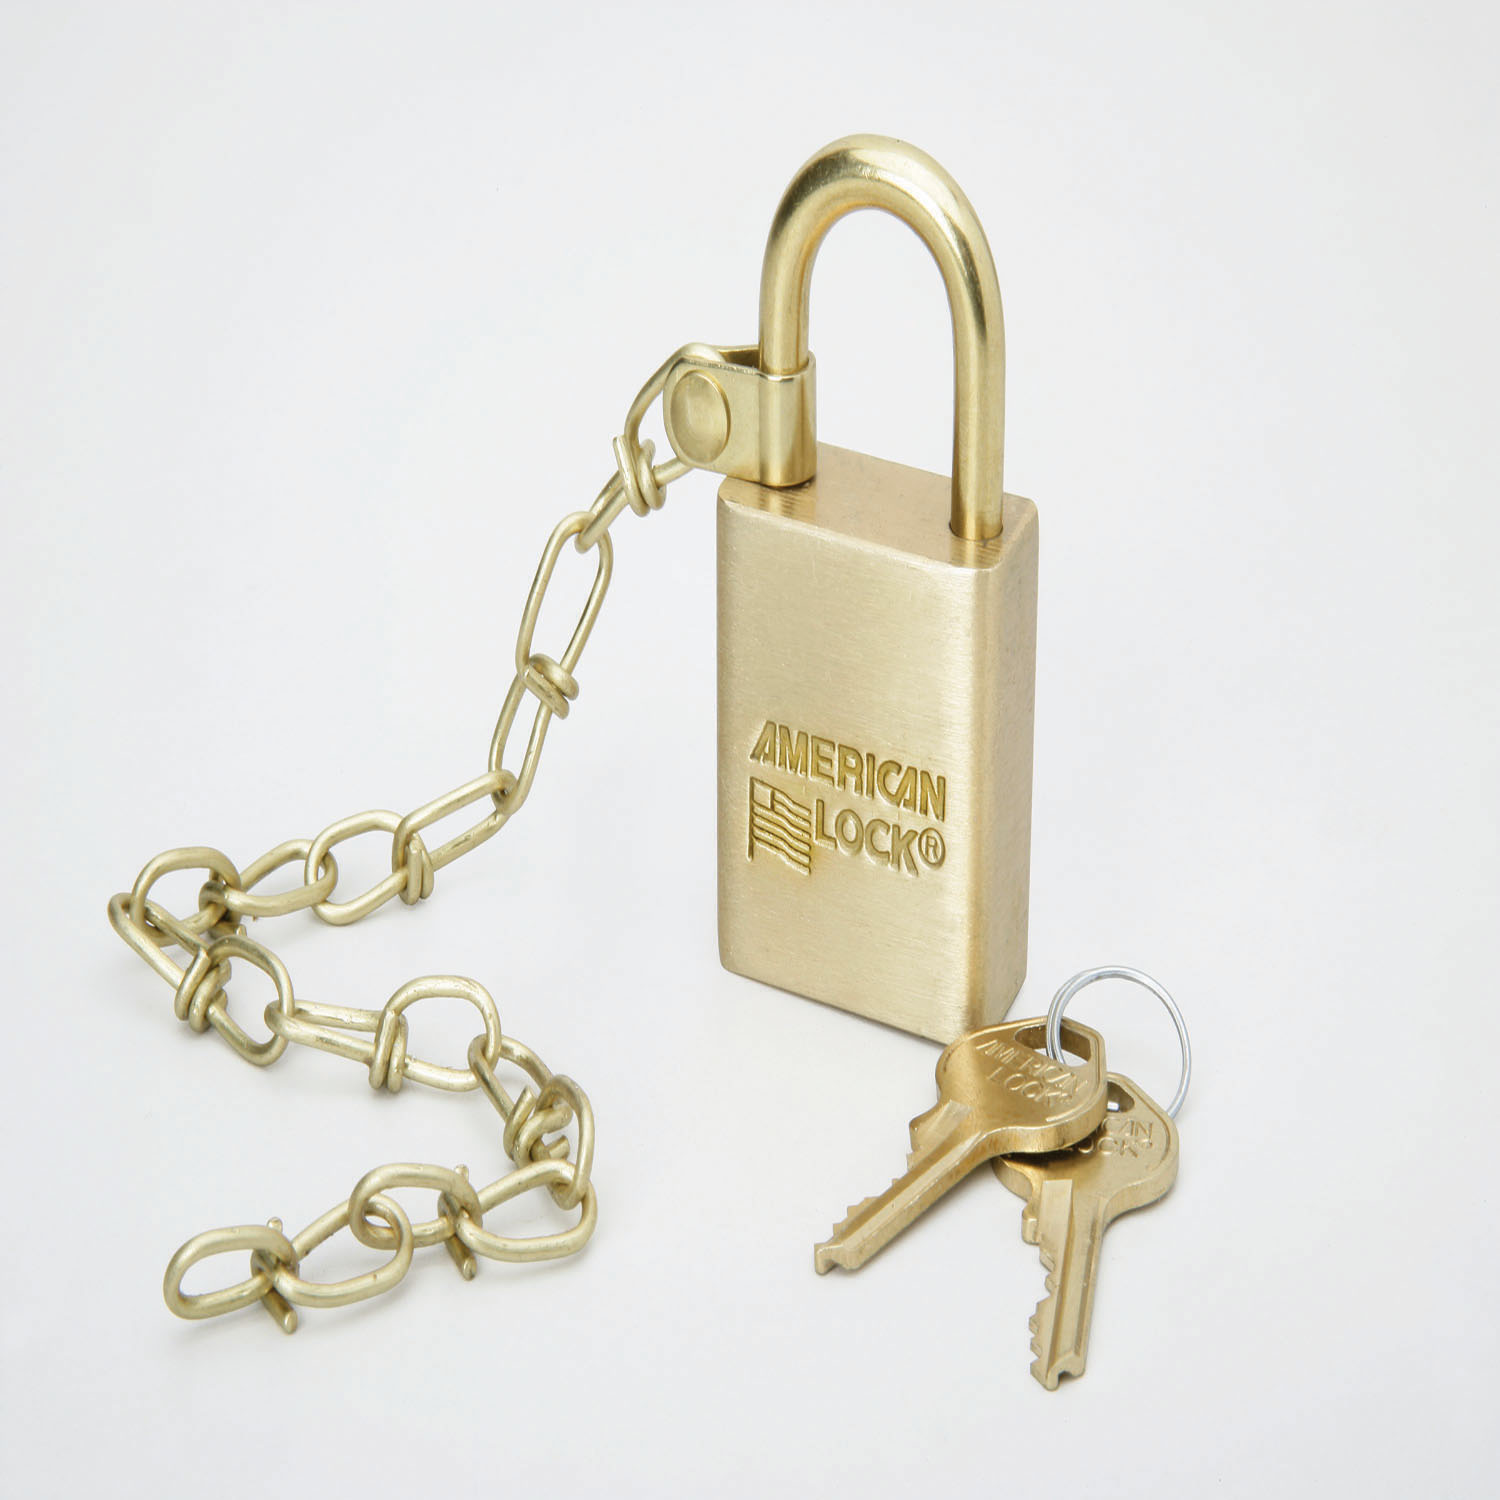 Padlock Set, Solid Case, 1.5" Wide Brass, Grand Master Keyed, w/Chain, 13/SE, 5-5-3 Groupings